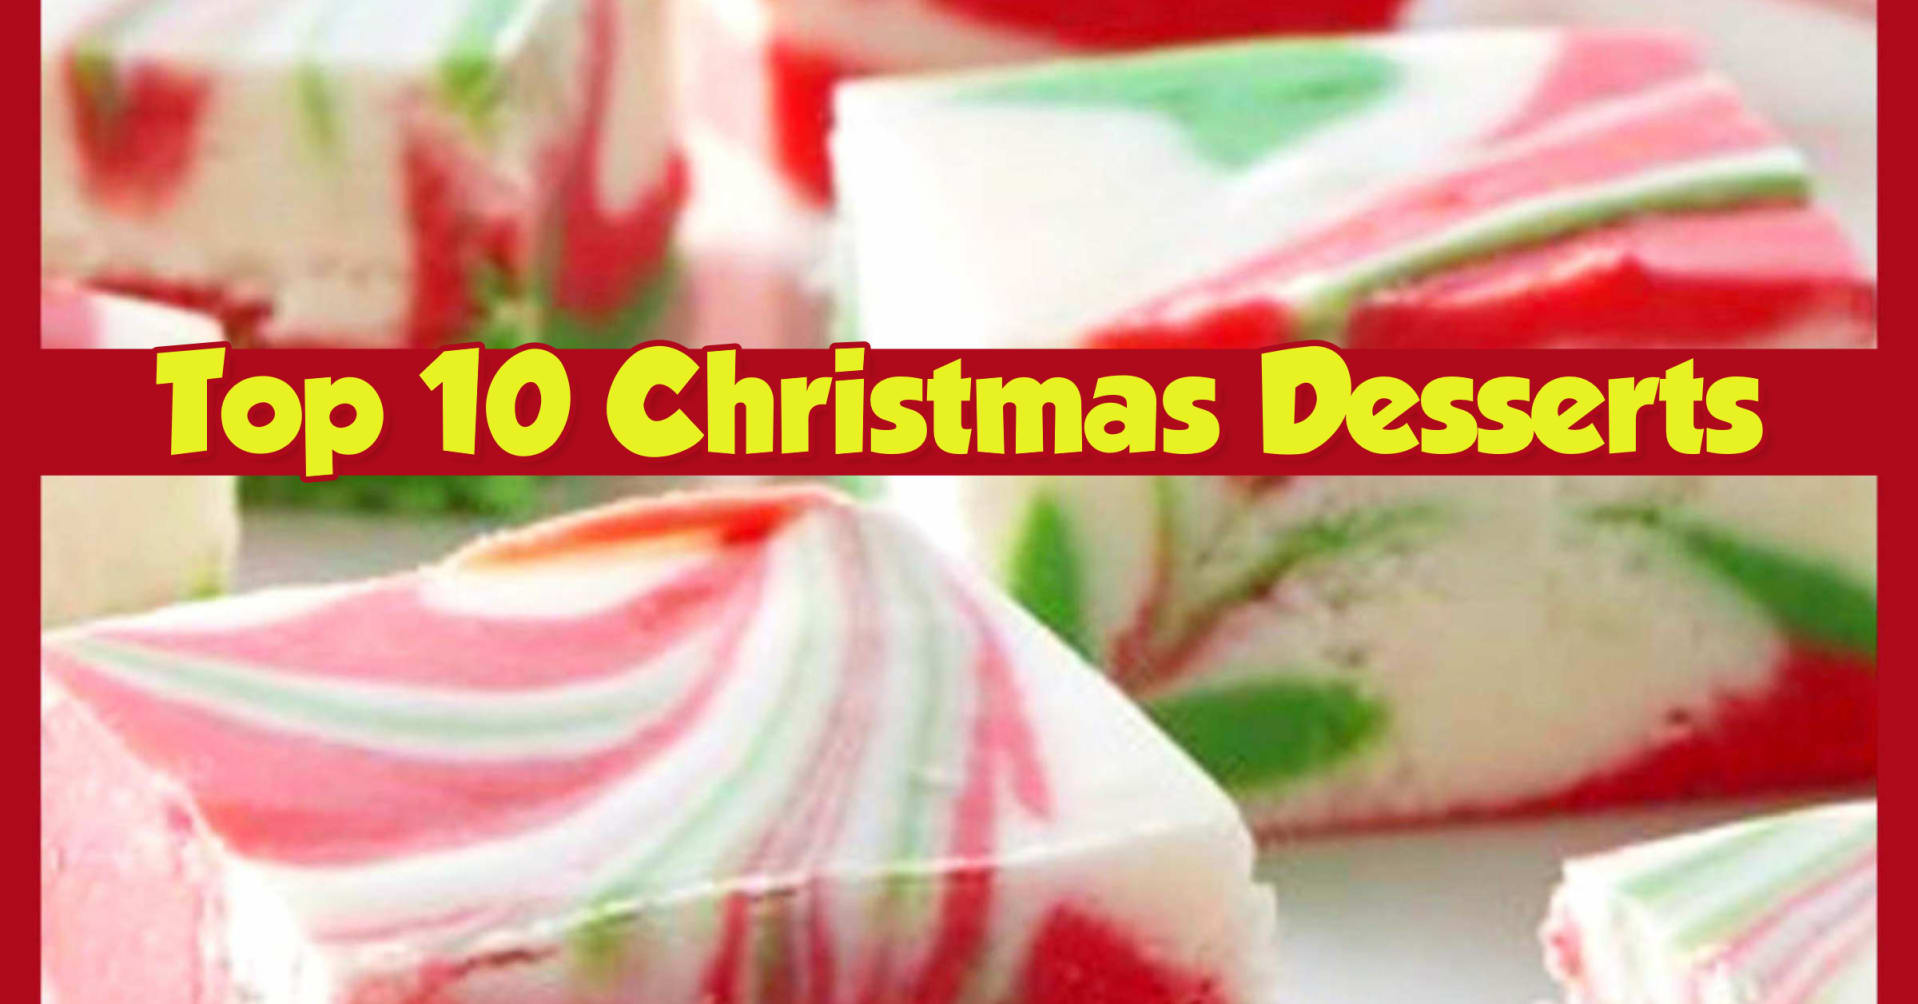 Easiest Christmas Desserts Ever!  Top 10 Christmas Desserts for a Holiday party, Office Party or to give as desserts and sweet treats gifts